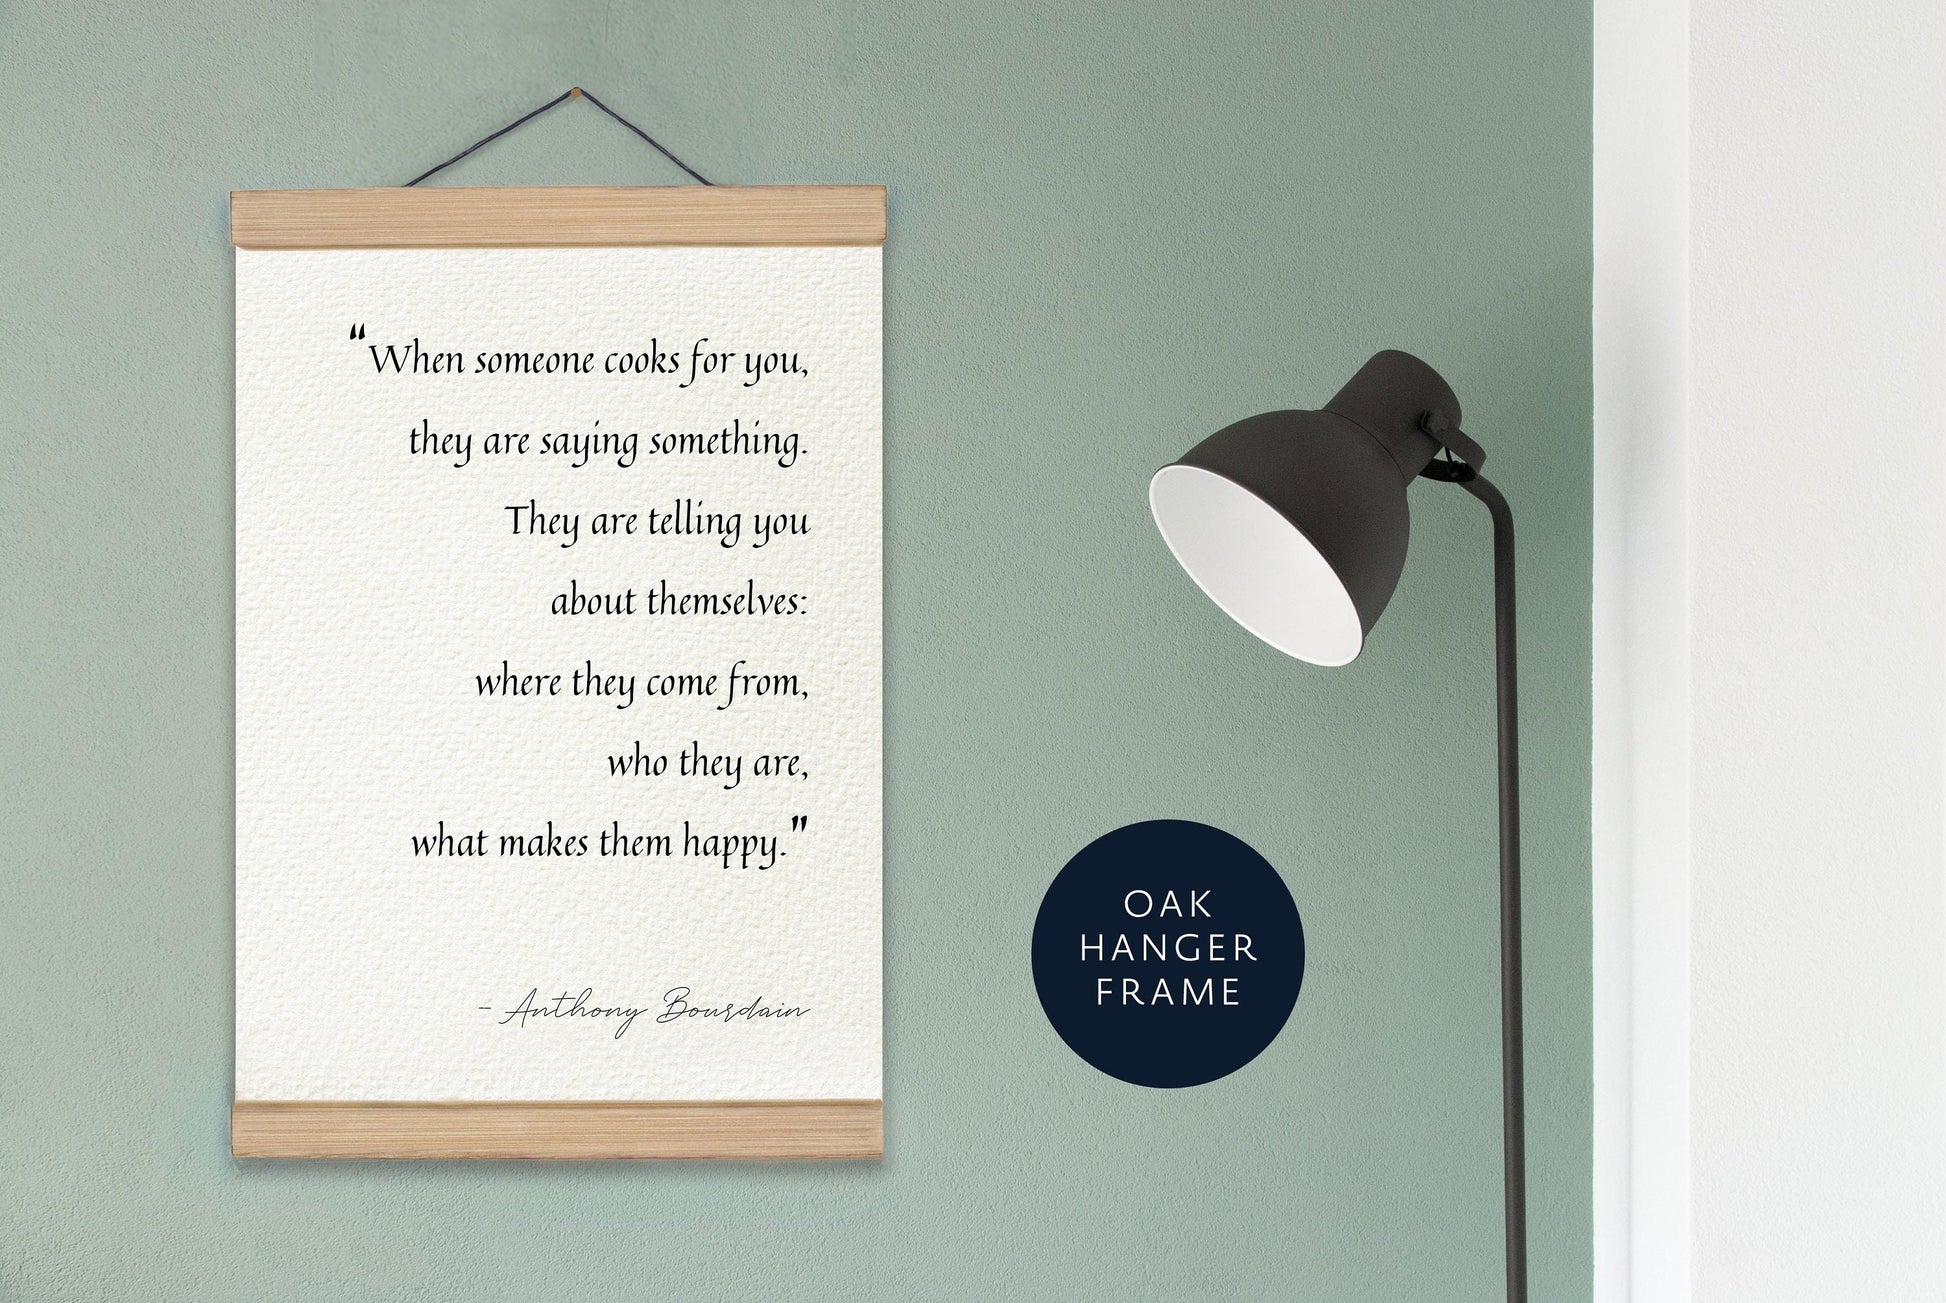 When someone cooks for you quote by Anthony Bourdain, Framed print, Anthony Bourdain Poster - Foodie Gift